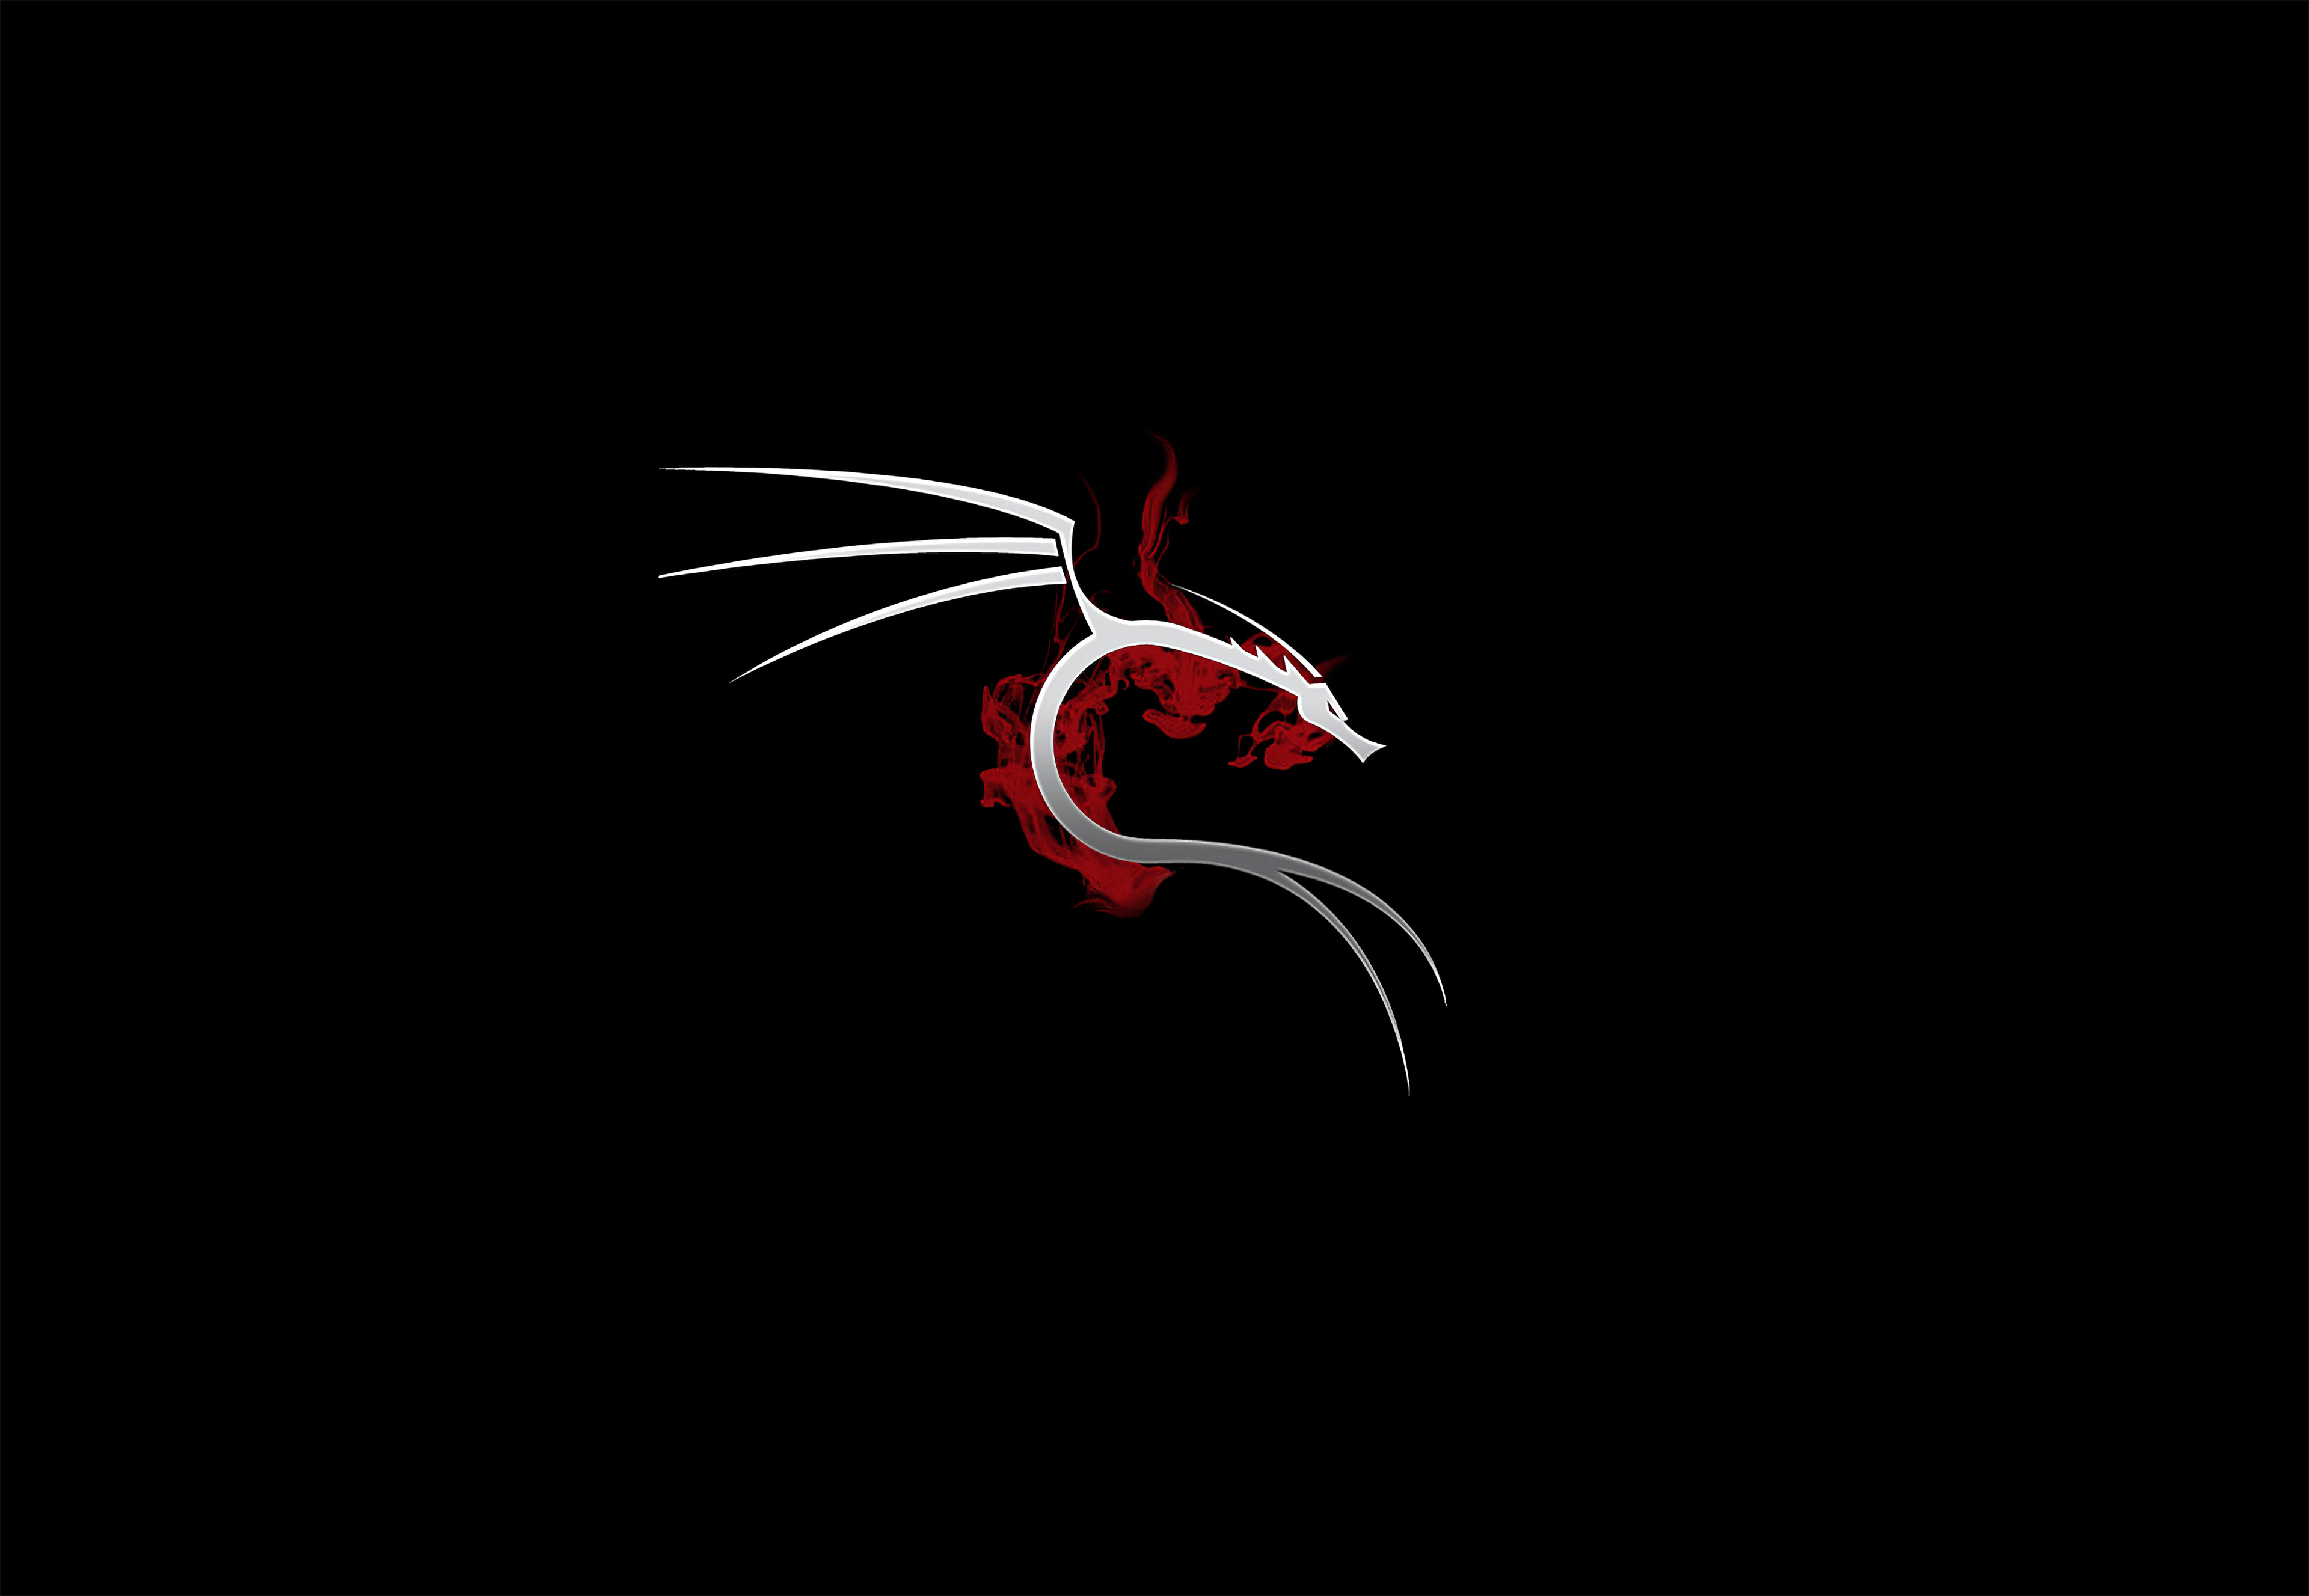 48x1152 Kali Linux 4k 48x1152 Resolution Hd 4k Wallpapers Images Backgrounds Photos And Pictures